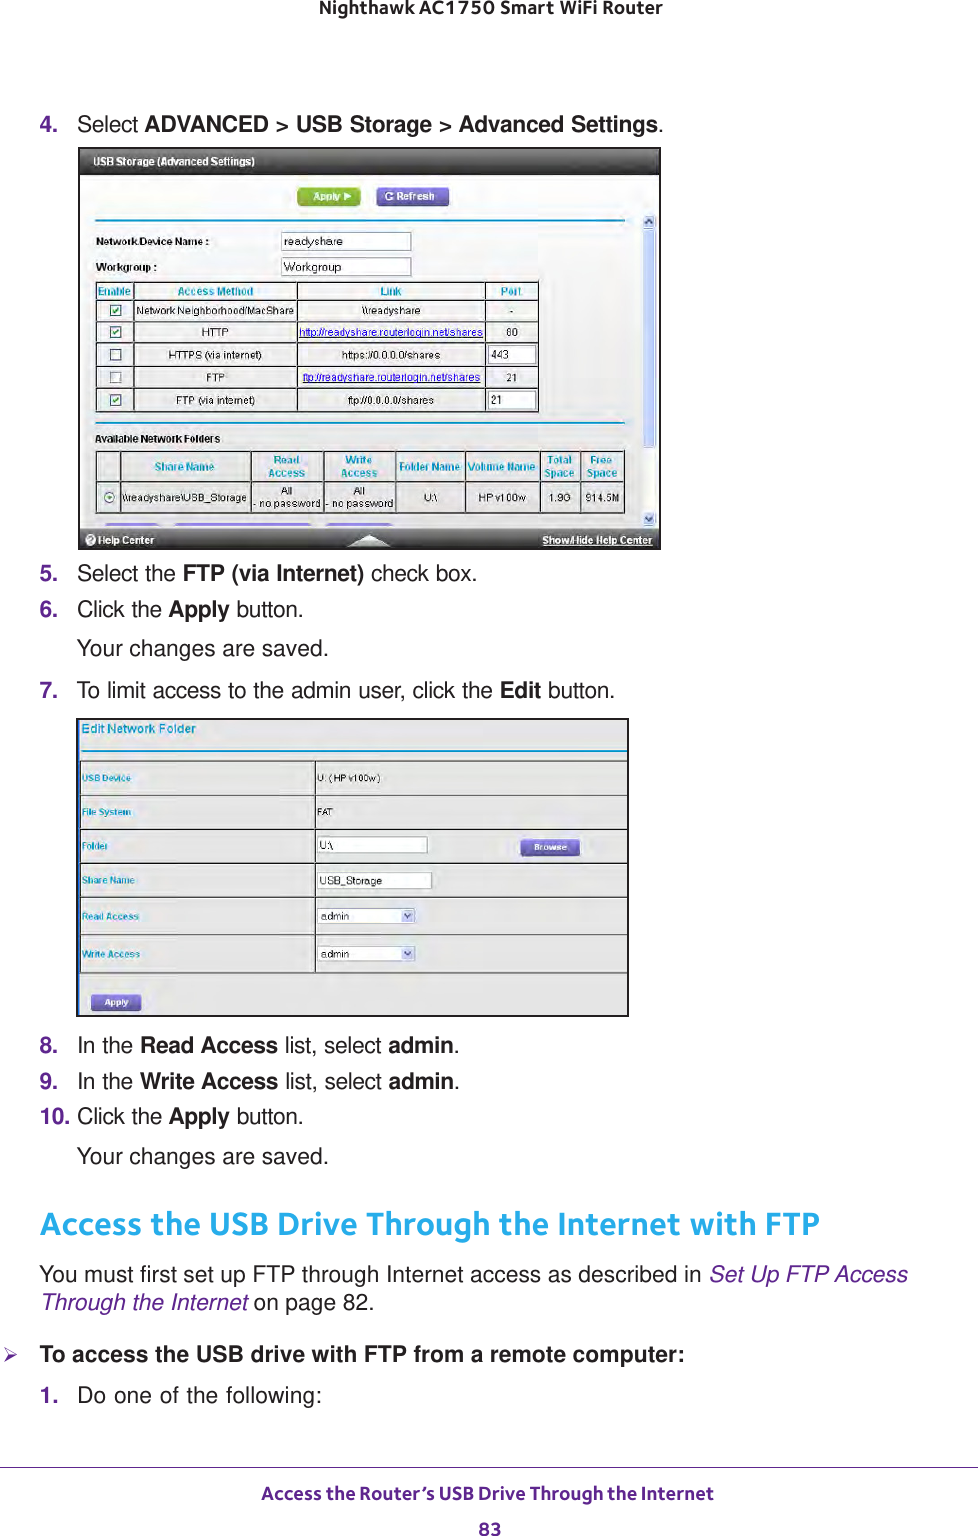 Access the Router’s USB Drive Through the Internet 83 Nighthawk AC1750 Smart WiFi Router4.  Select ADVANCED &gt; USB Storage &gt; Advanced Settings.5.  Select the FTP (via Internet) check box.6.  Click the Apply button.Your changes are saved.7.  To limit access to the admin user, click the Edit button.8.  In the Read Access list, select admin.9.  In the Write Access list, select admin.10. Click the Apply button.Your changes are saved.Access the USB Drive Through the Internet with FTPYou must first set up FTP through Internet access as described in Set Up FTP Access Through the Internet on page  82.To access the USB drive with FTP from a remote computer:1.  Do one of the following: